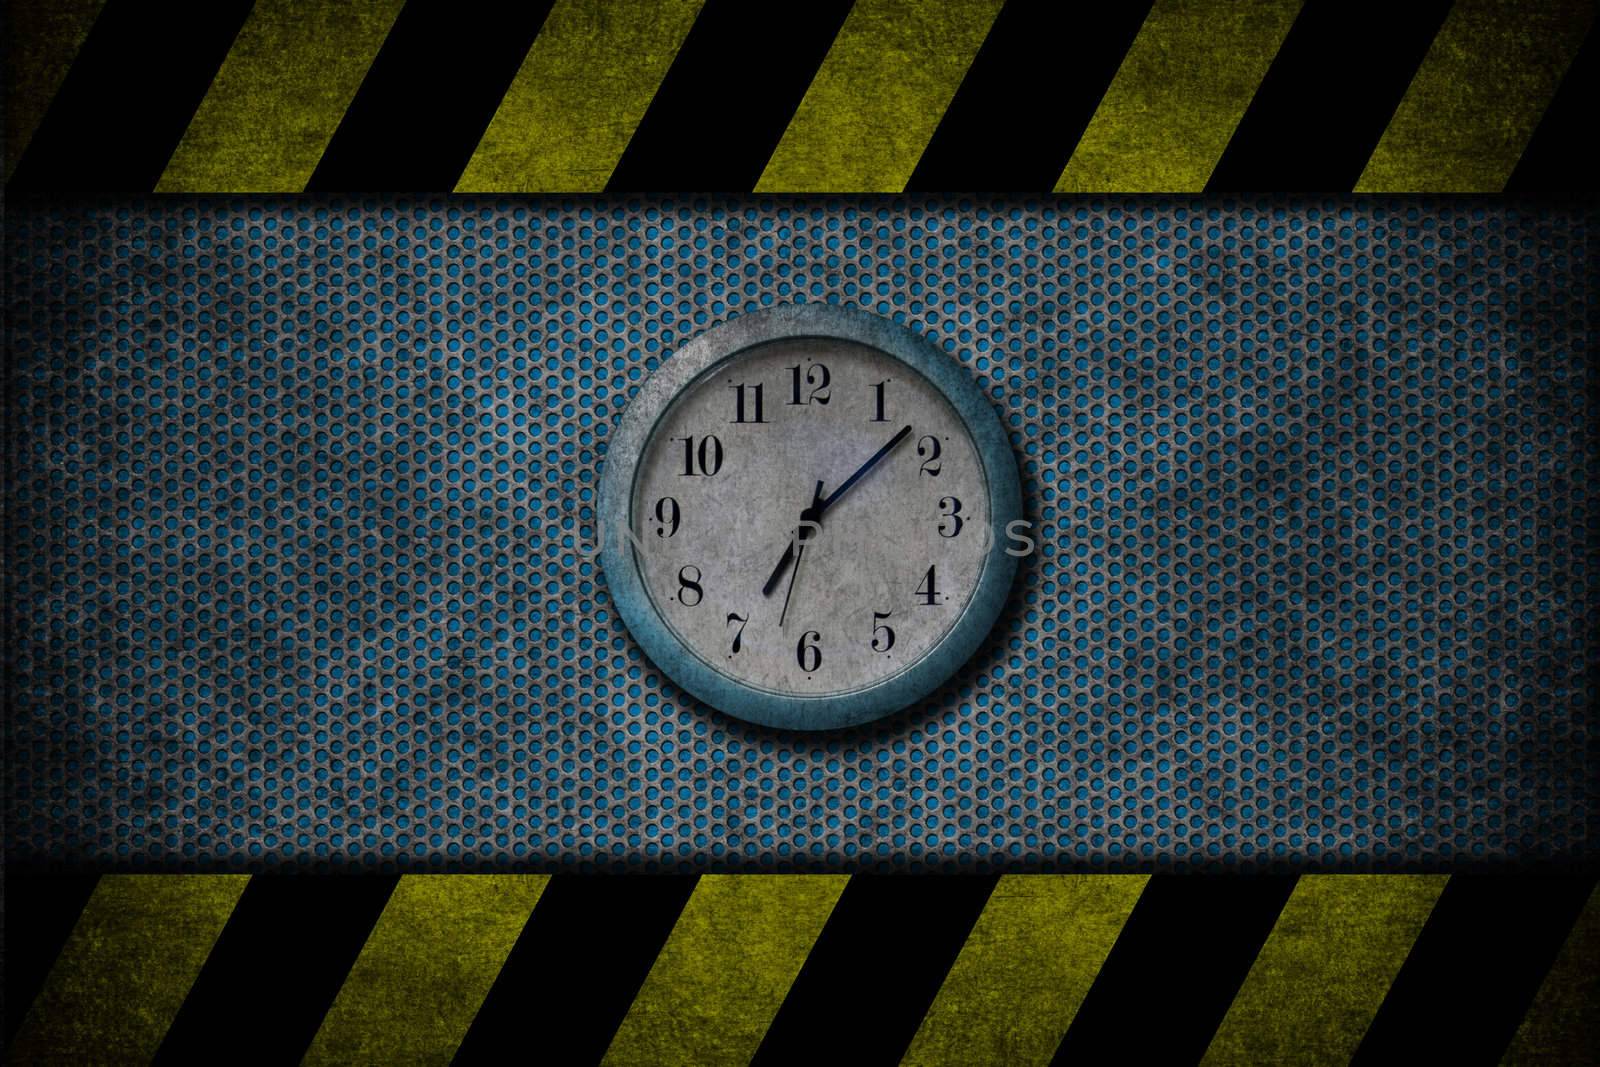 A grunge image with blue and white clock on metal